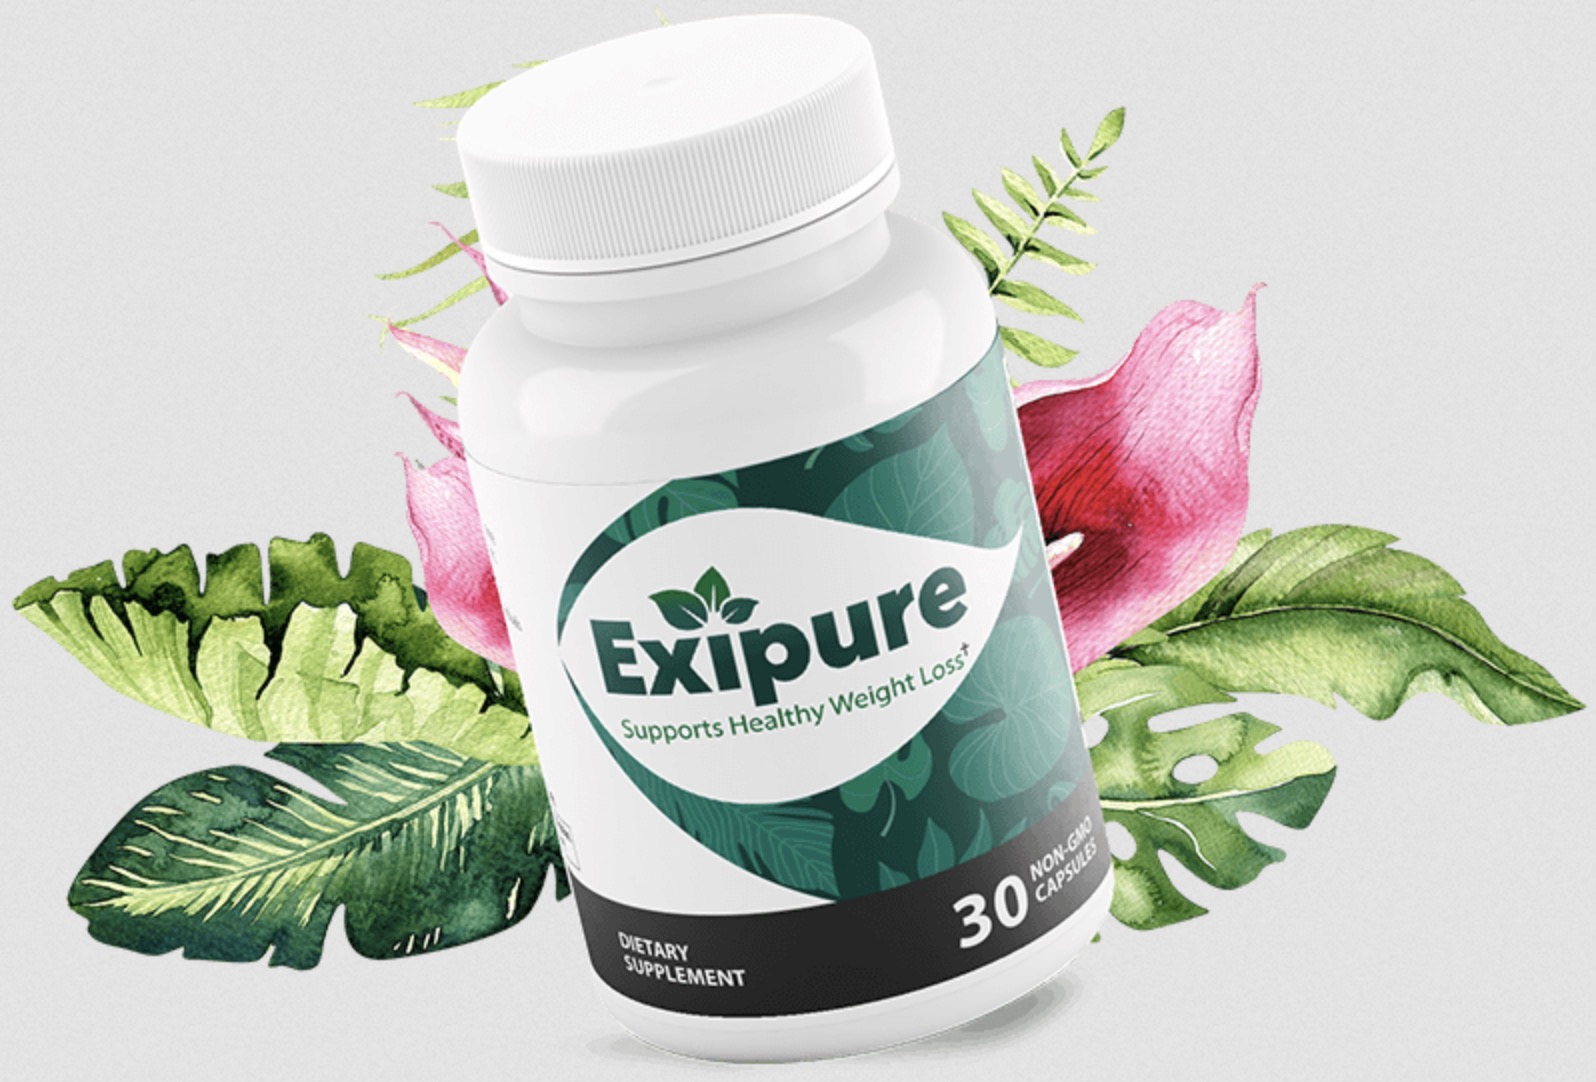 How To Use Exipure Weight Loss